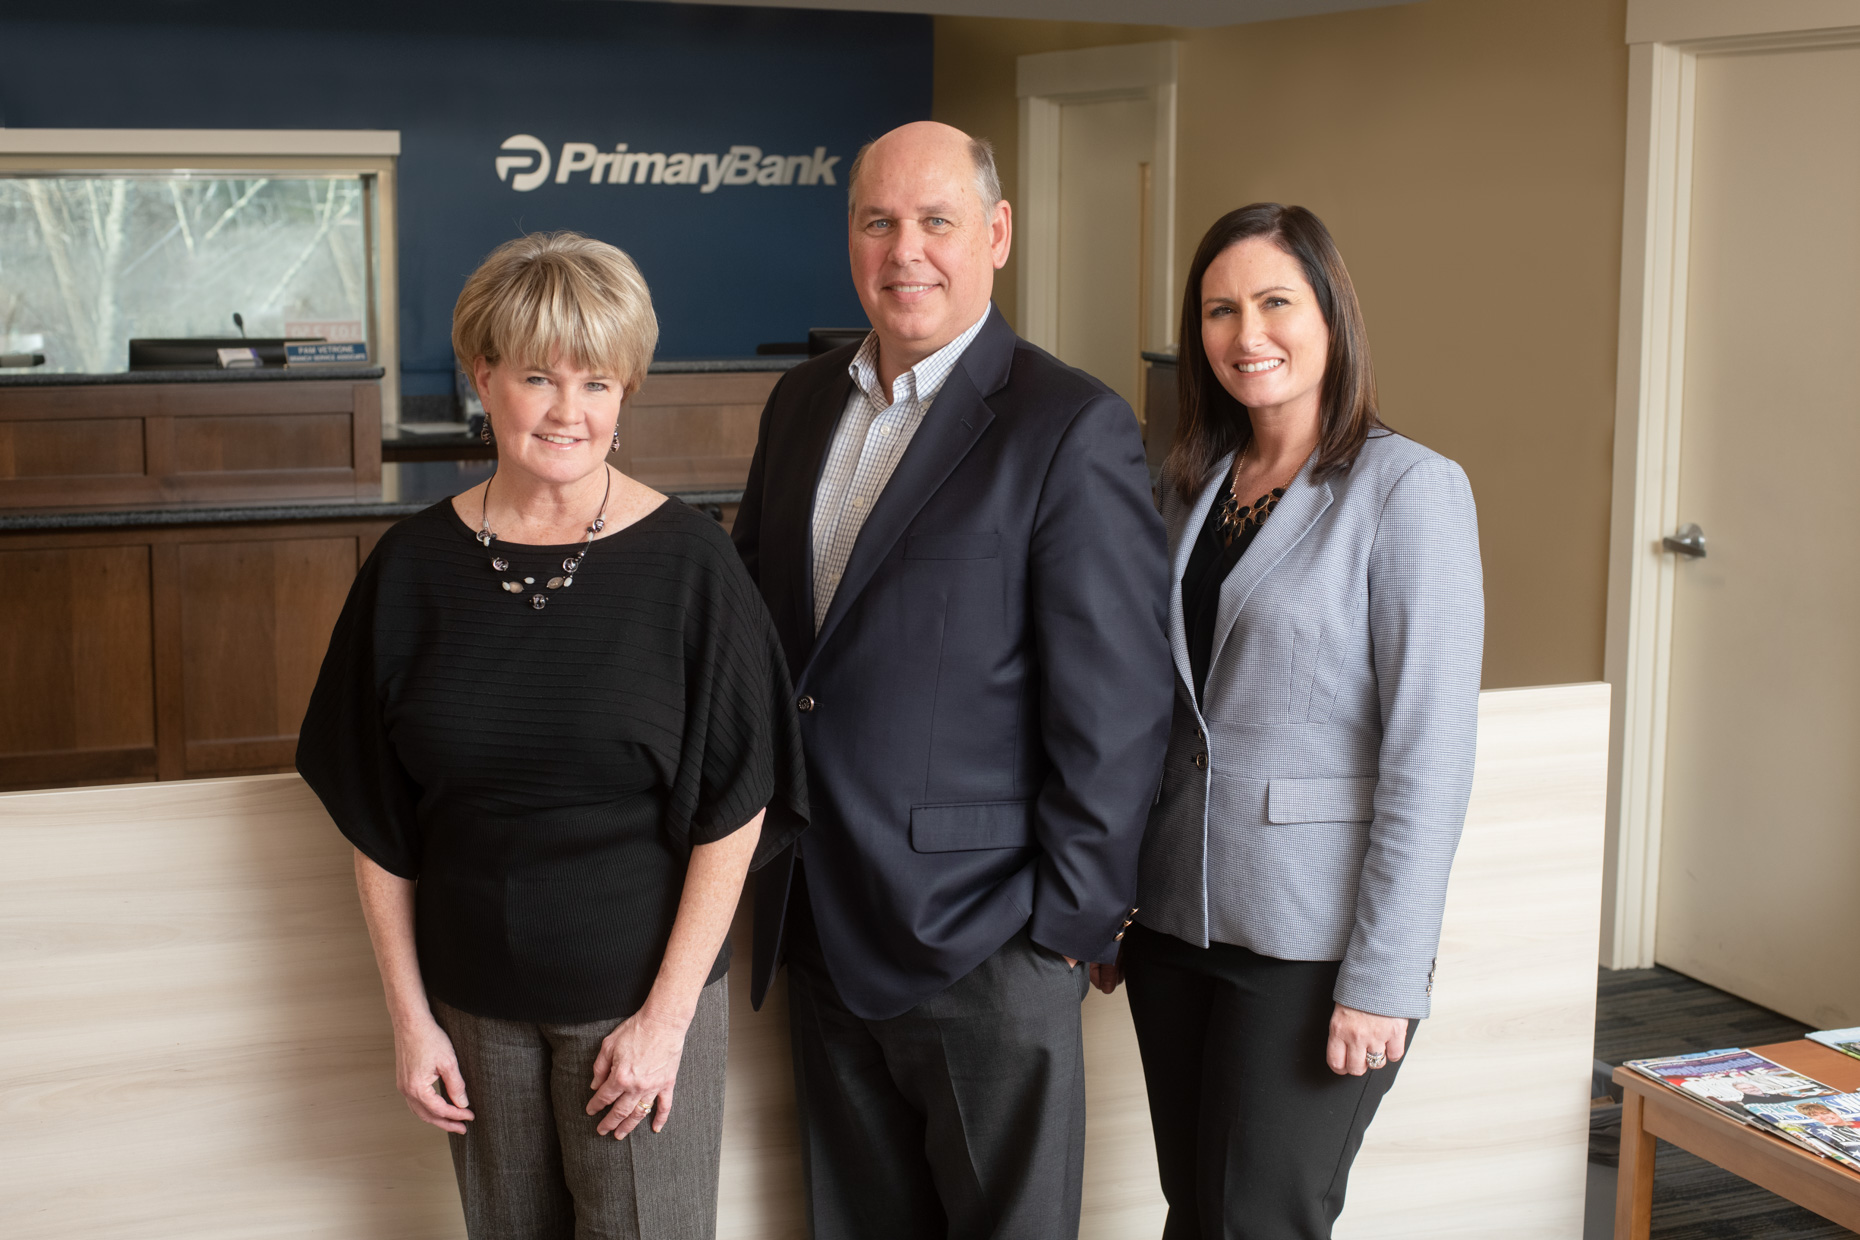 Primary bank group